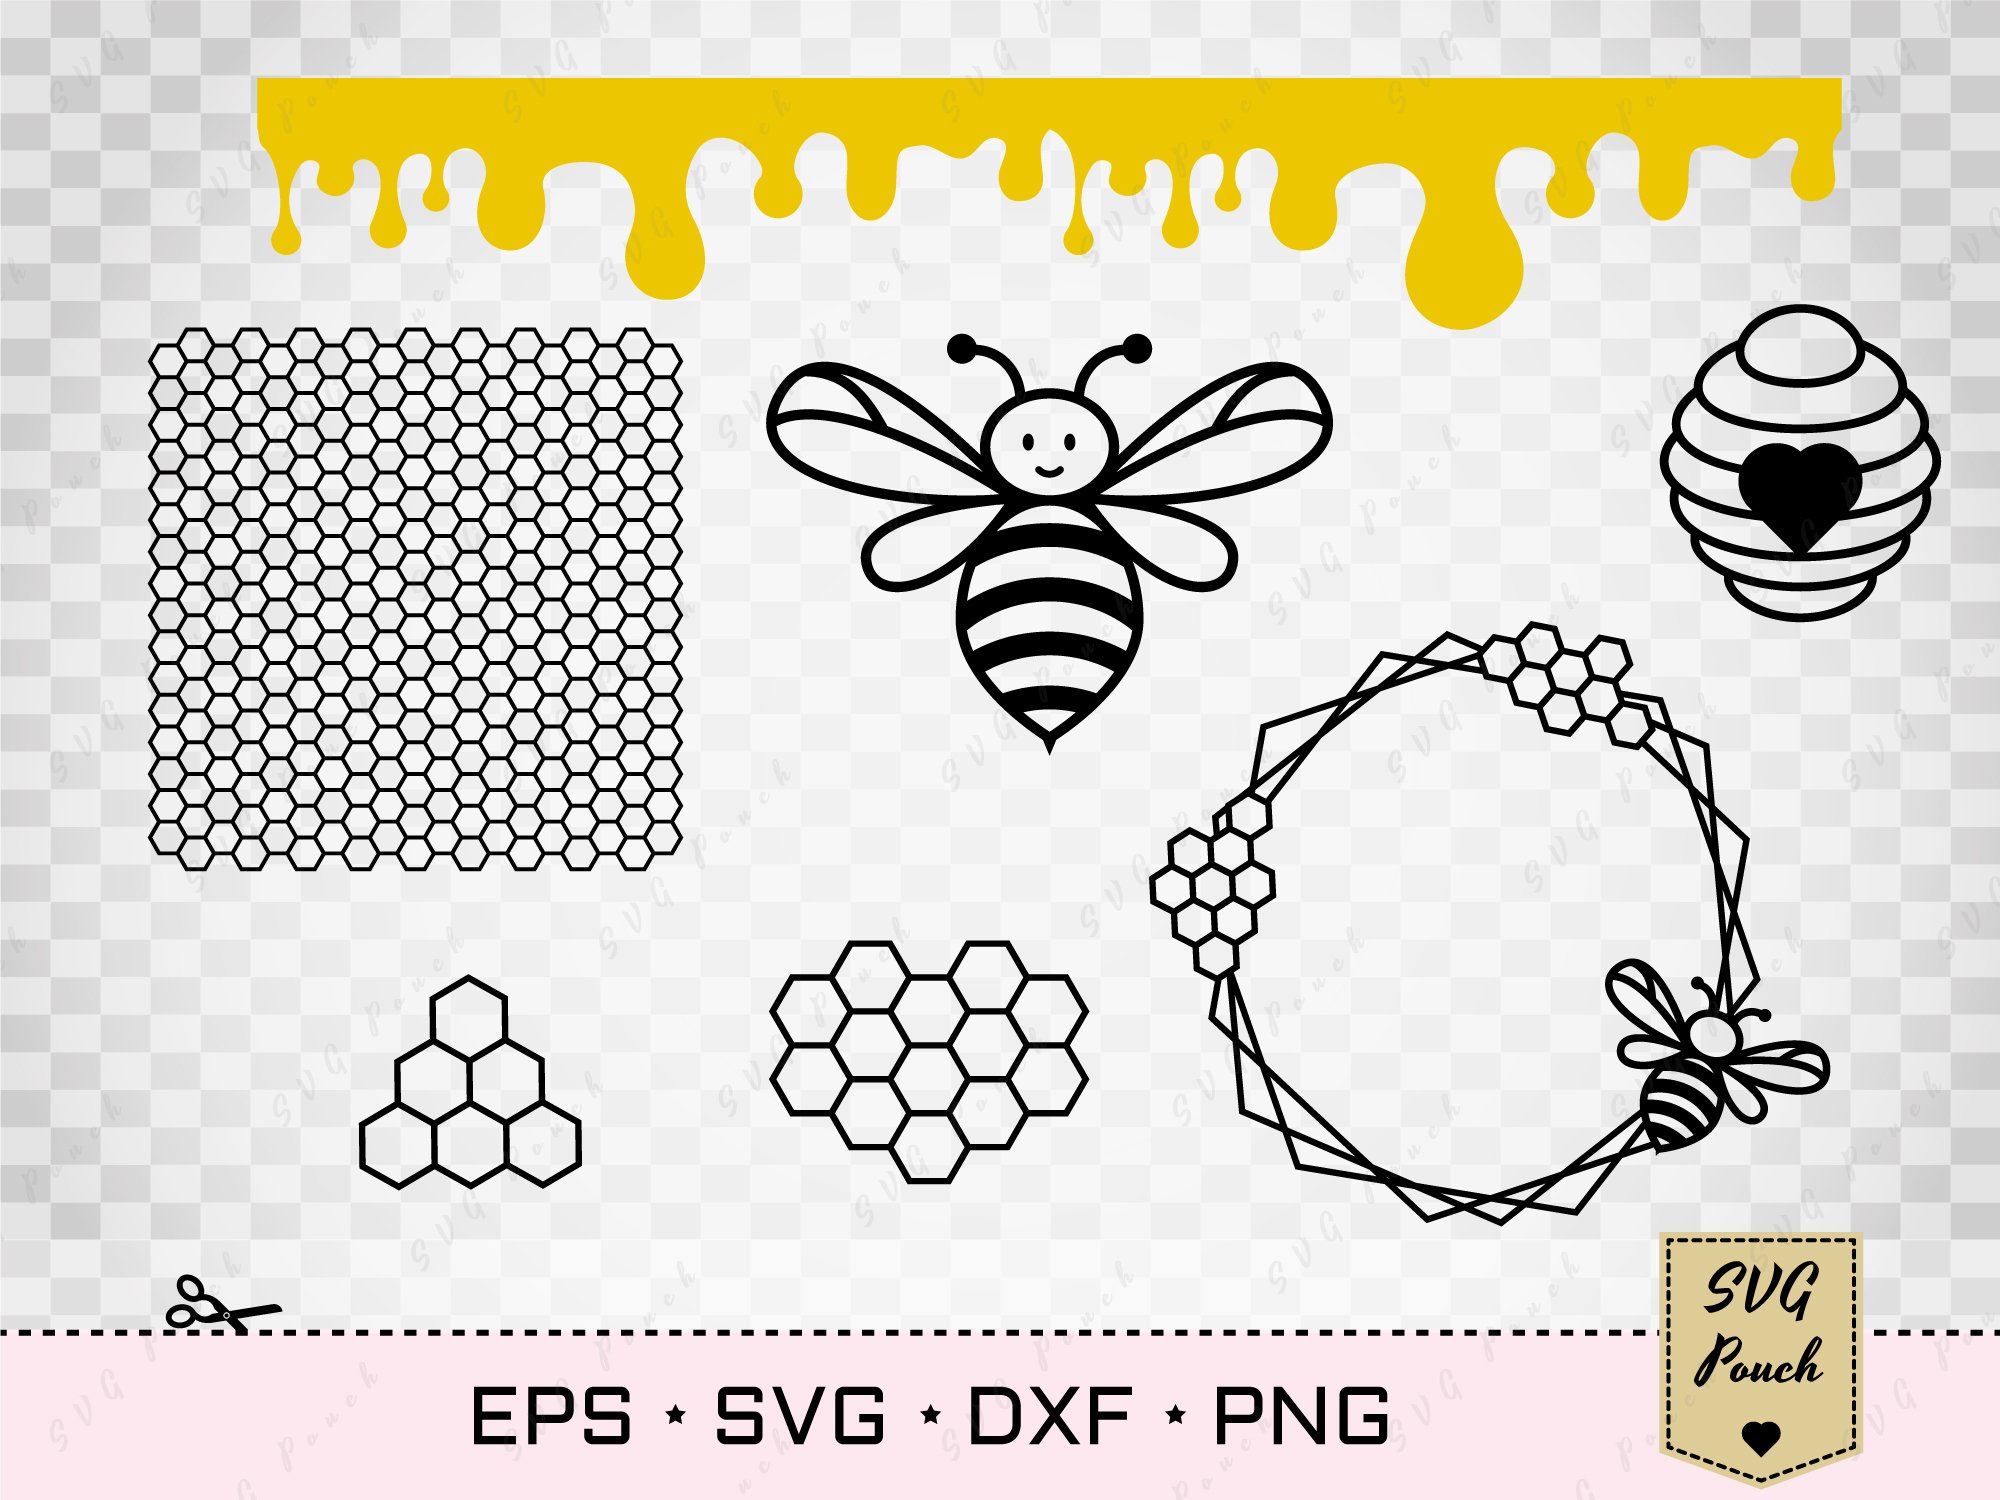 Bees and honeycombs clipart.